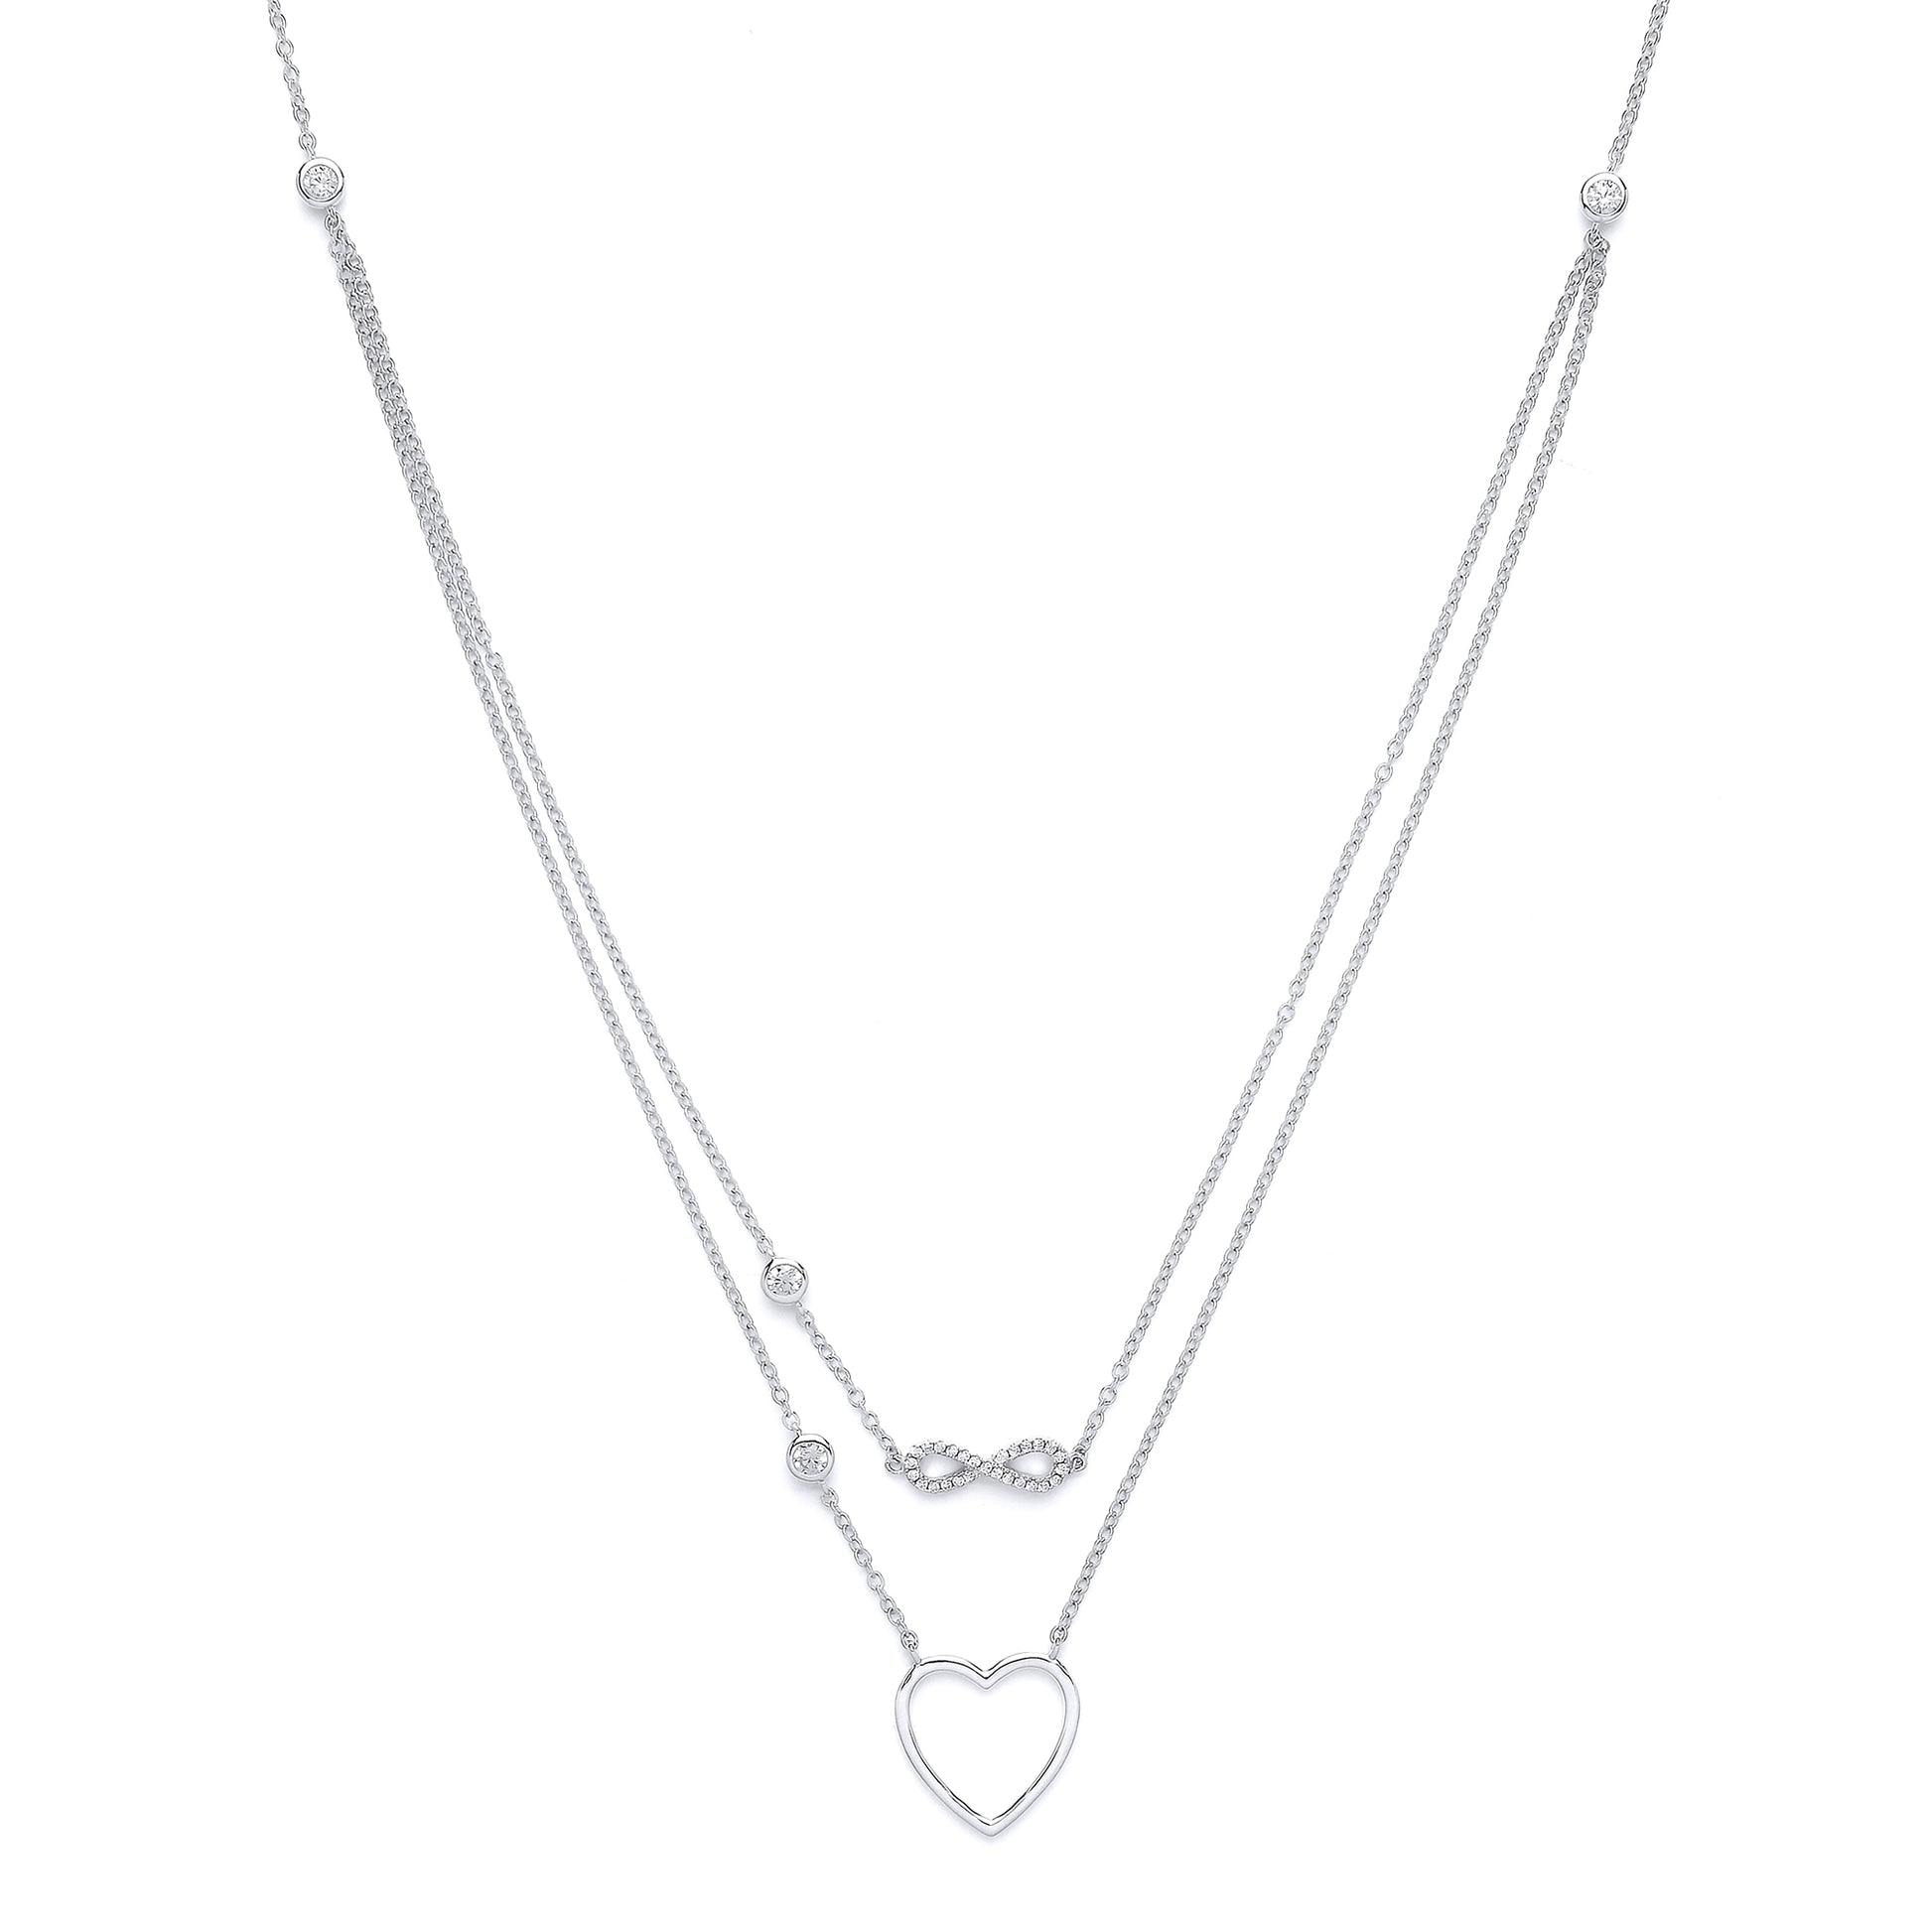 Silver  CZ Infinity Love Heart Double Drop Necklace 16 + 2 inch - GVK139